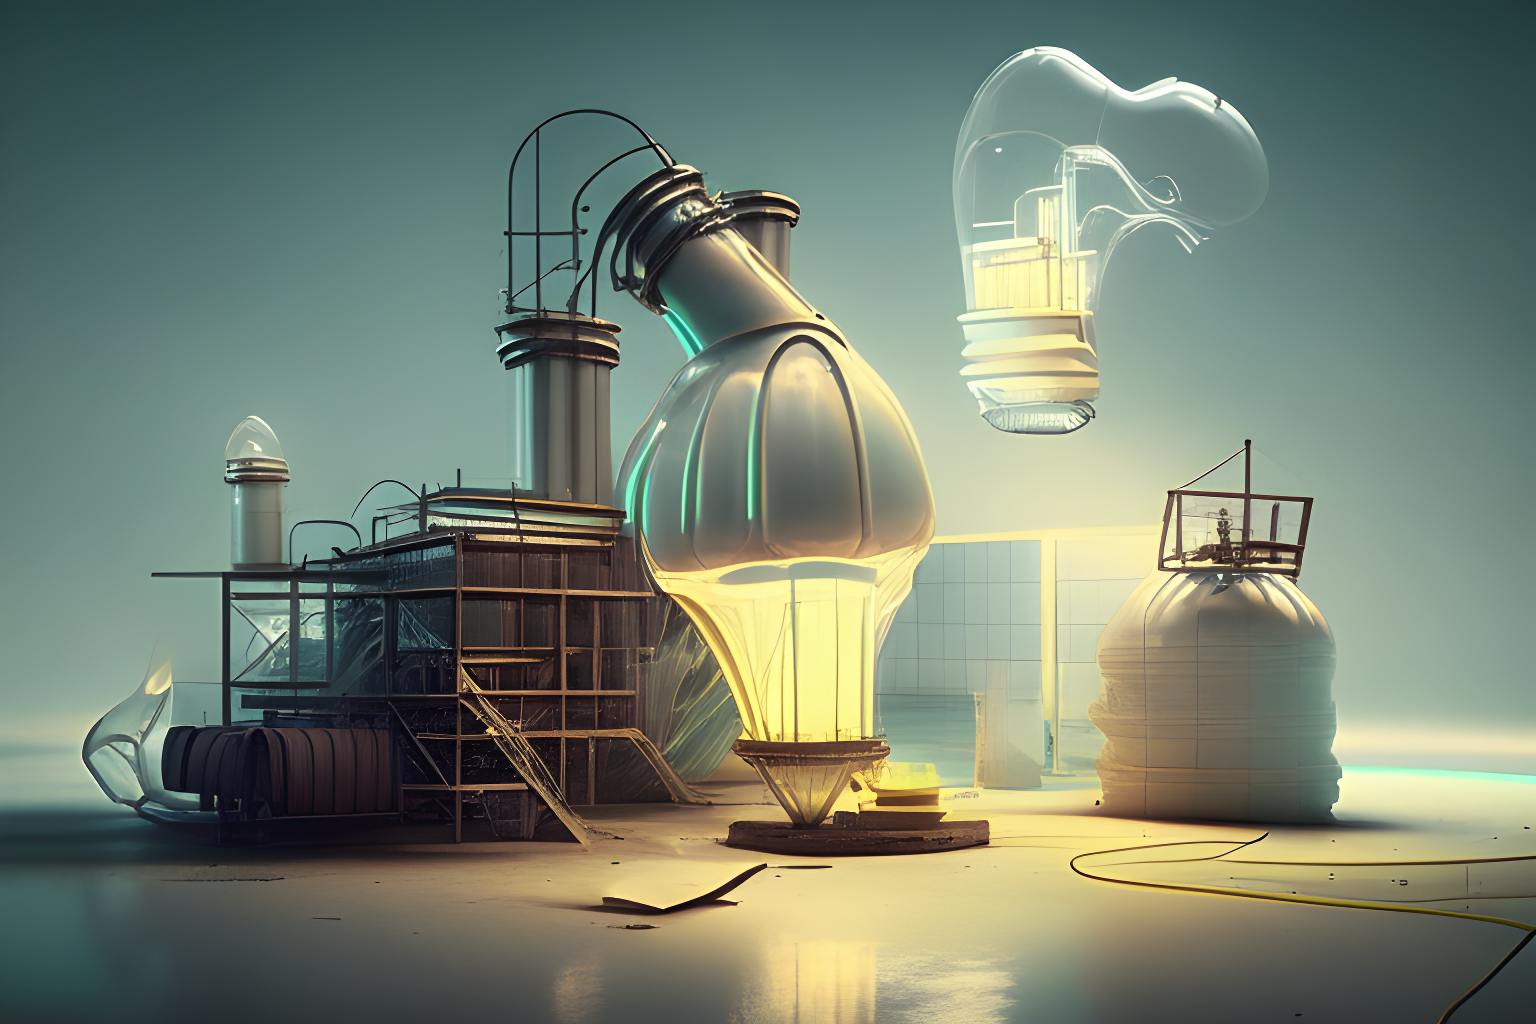 /idea-factories-how-do-we-create-more-and-better-ideas-for-humanity feature image